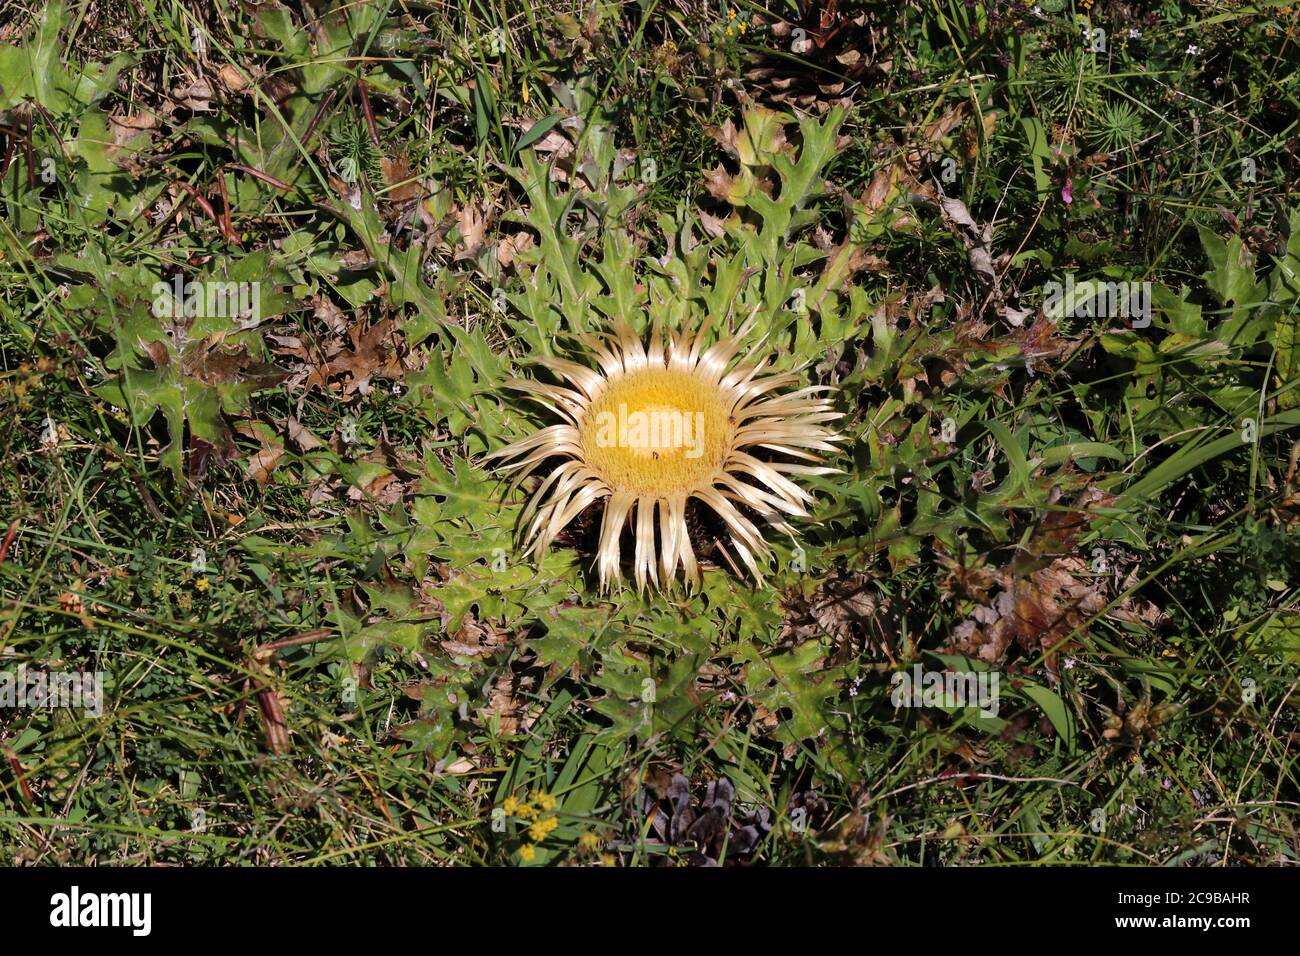 Carlina acanthifolia, Acanthus-Leaved, Carline Thistle. Wild plant shot in summer. Stock Photo